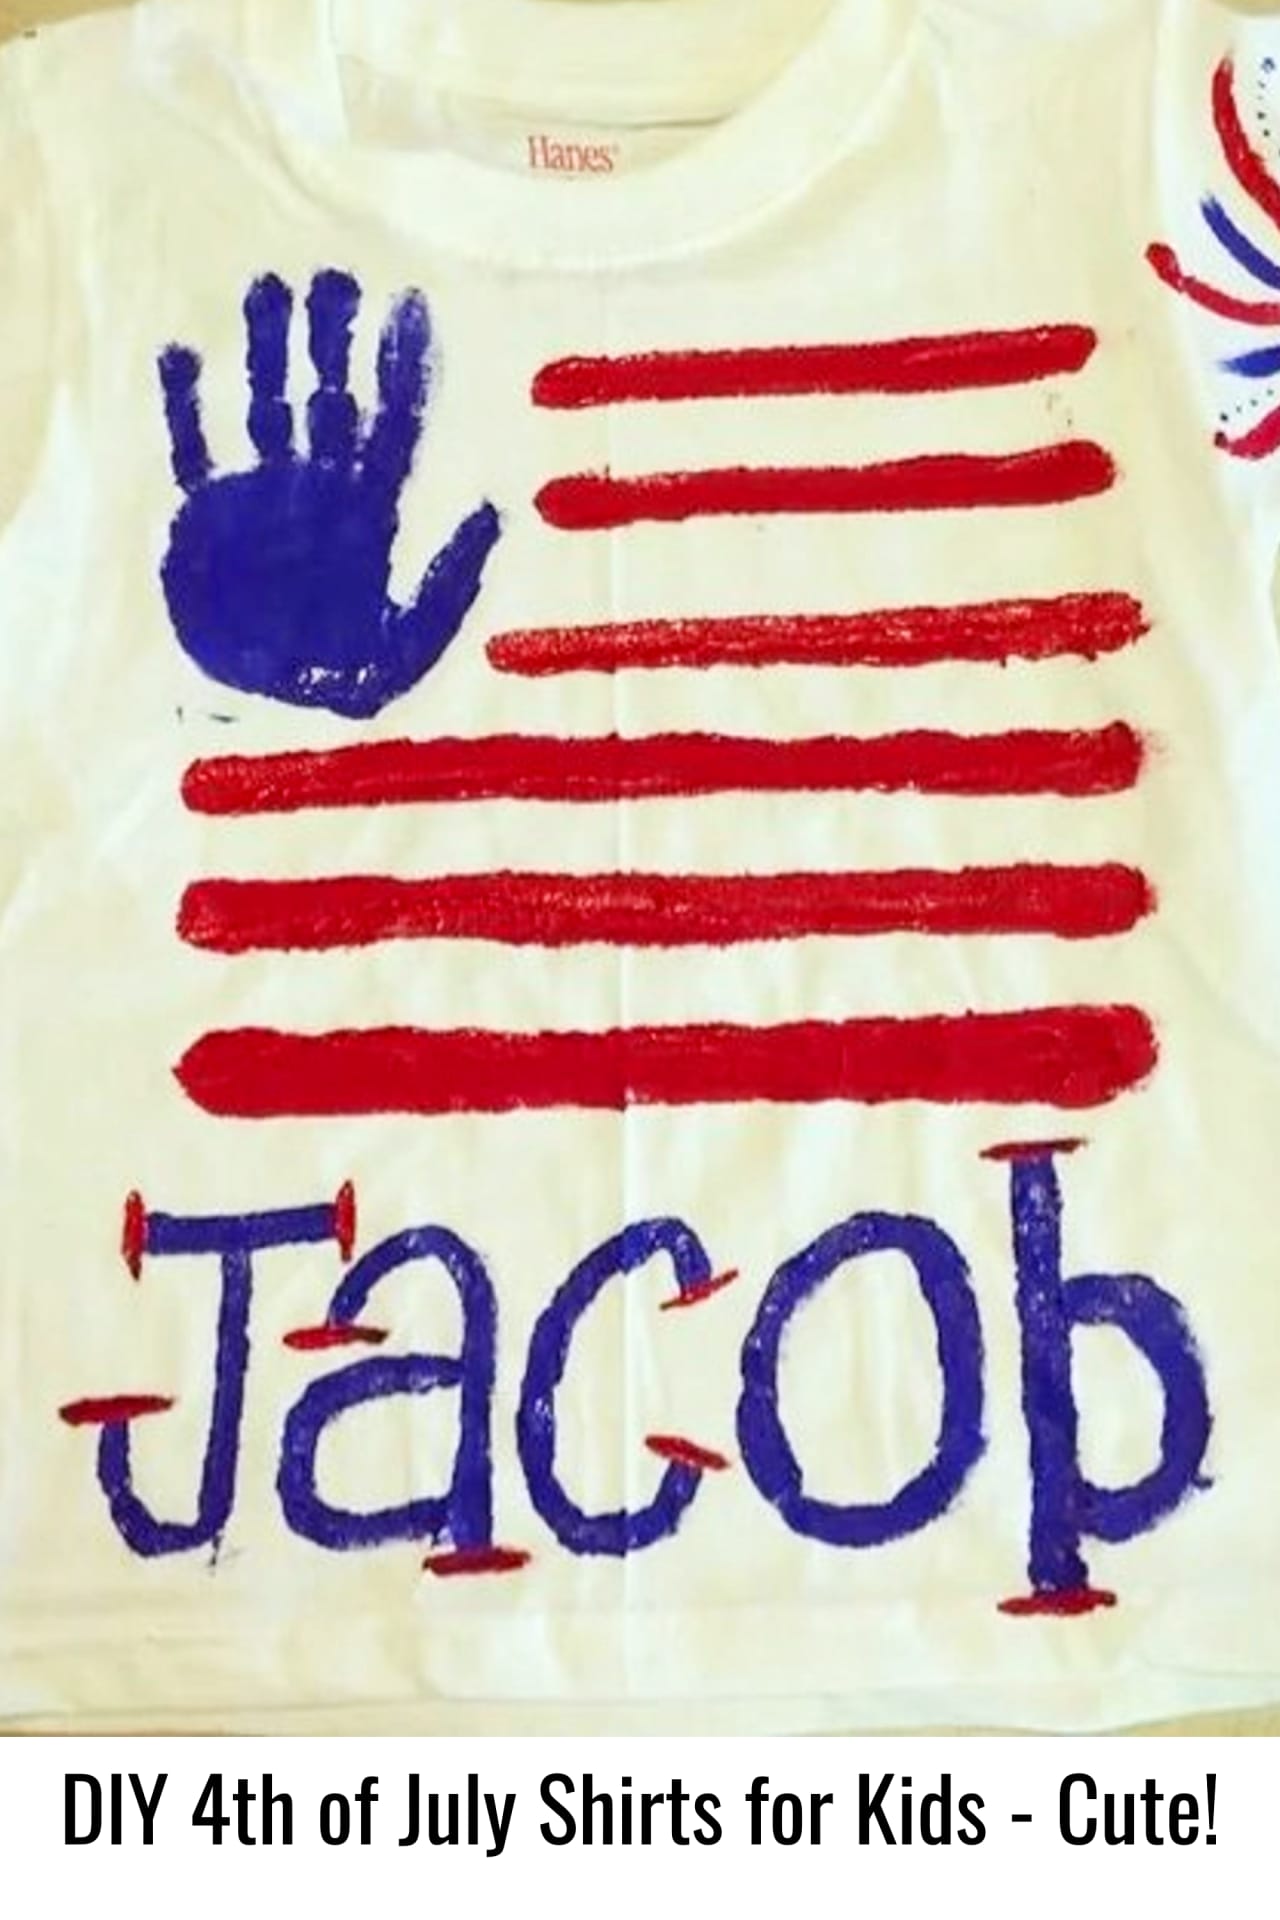 DIY 4th of July shirts for kids - 4th of July crafts for kids - handprint t-shirts for kids to make 